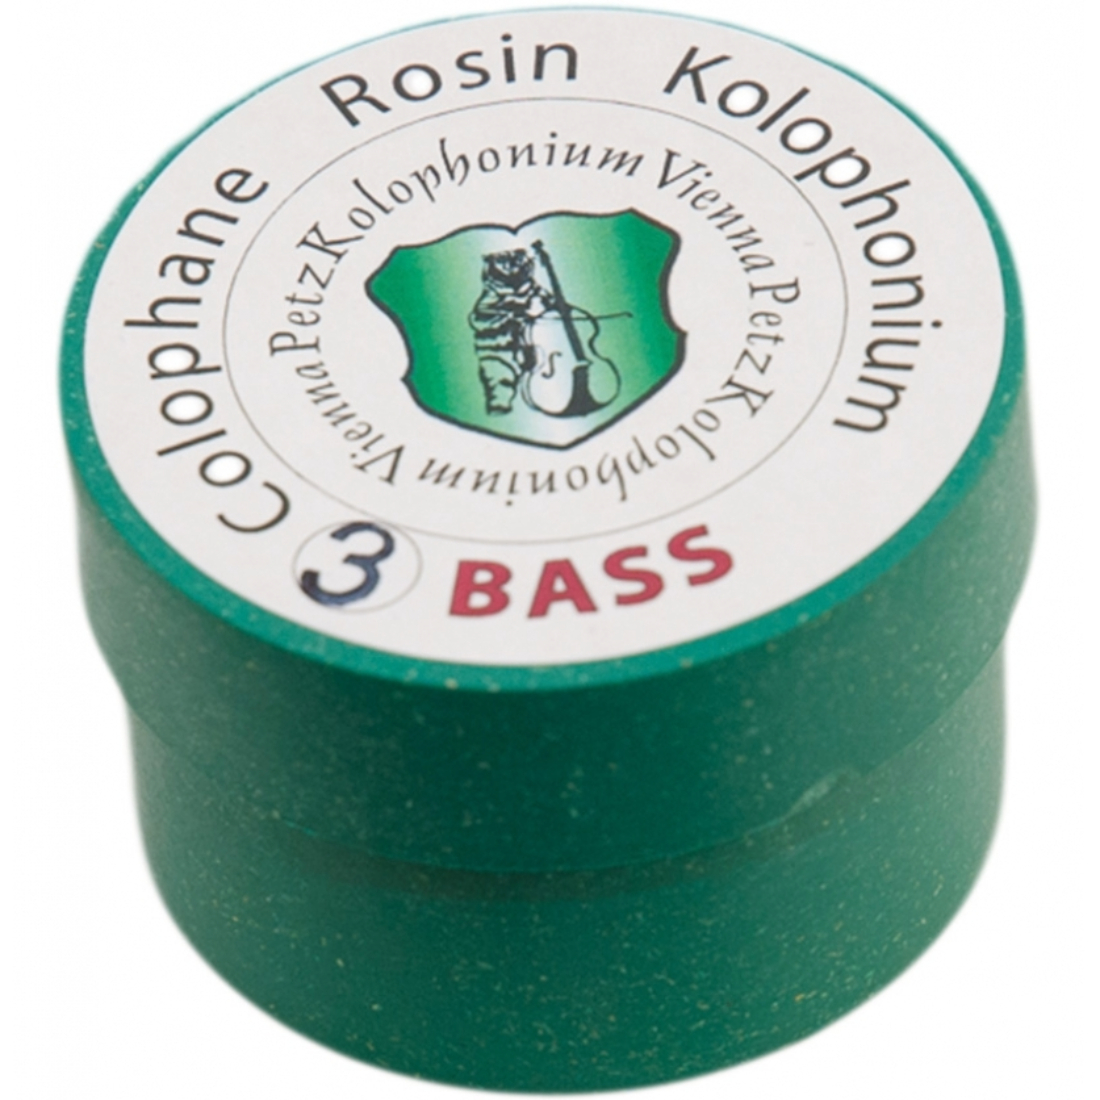 Green and white case of Petz Bass Rosin